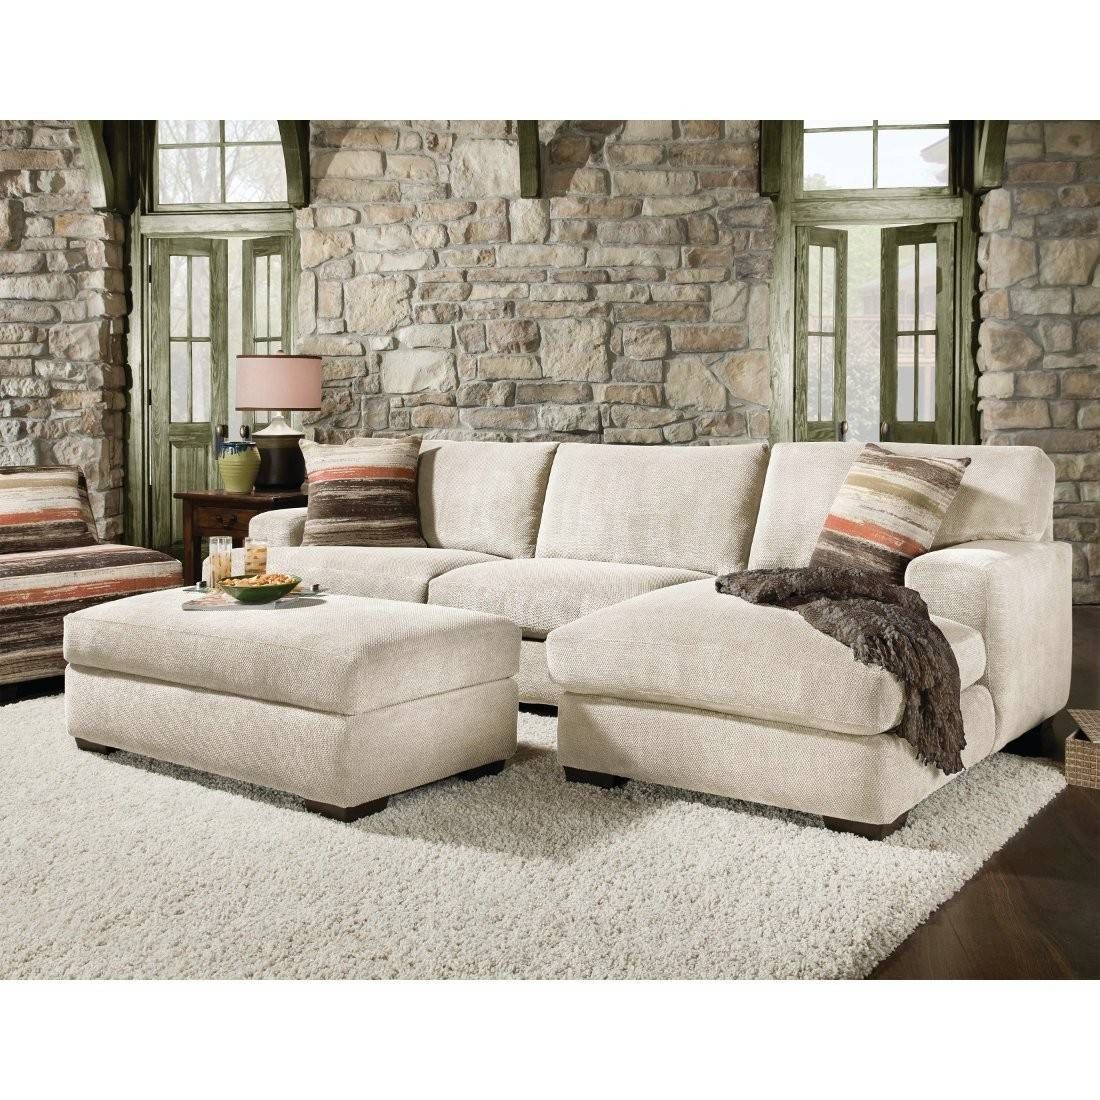 Cozy Sectional Sofa With Chaise And Ottoman 29 About Remodel Down Pertaining To Cozy Sectional Sofas (Photo 5 of 30)